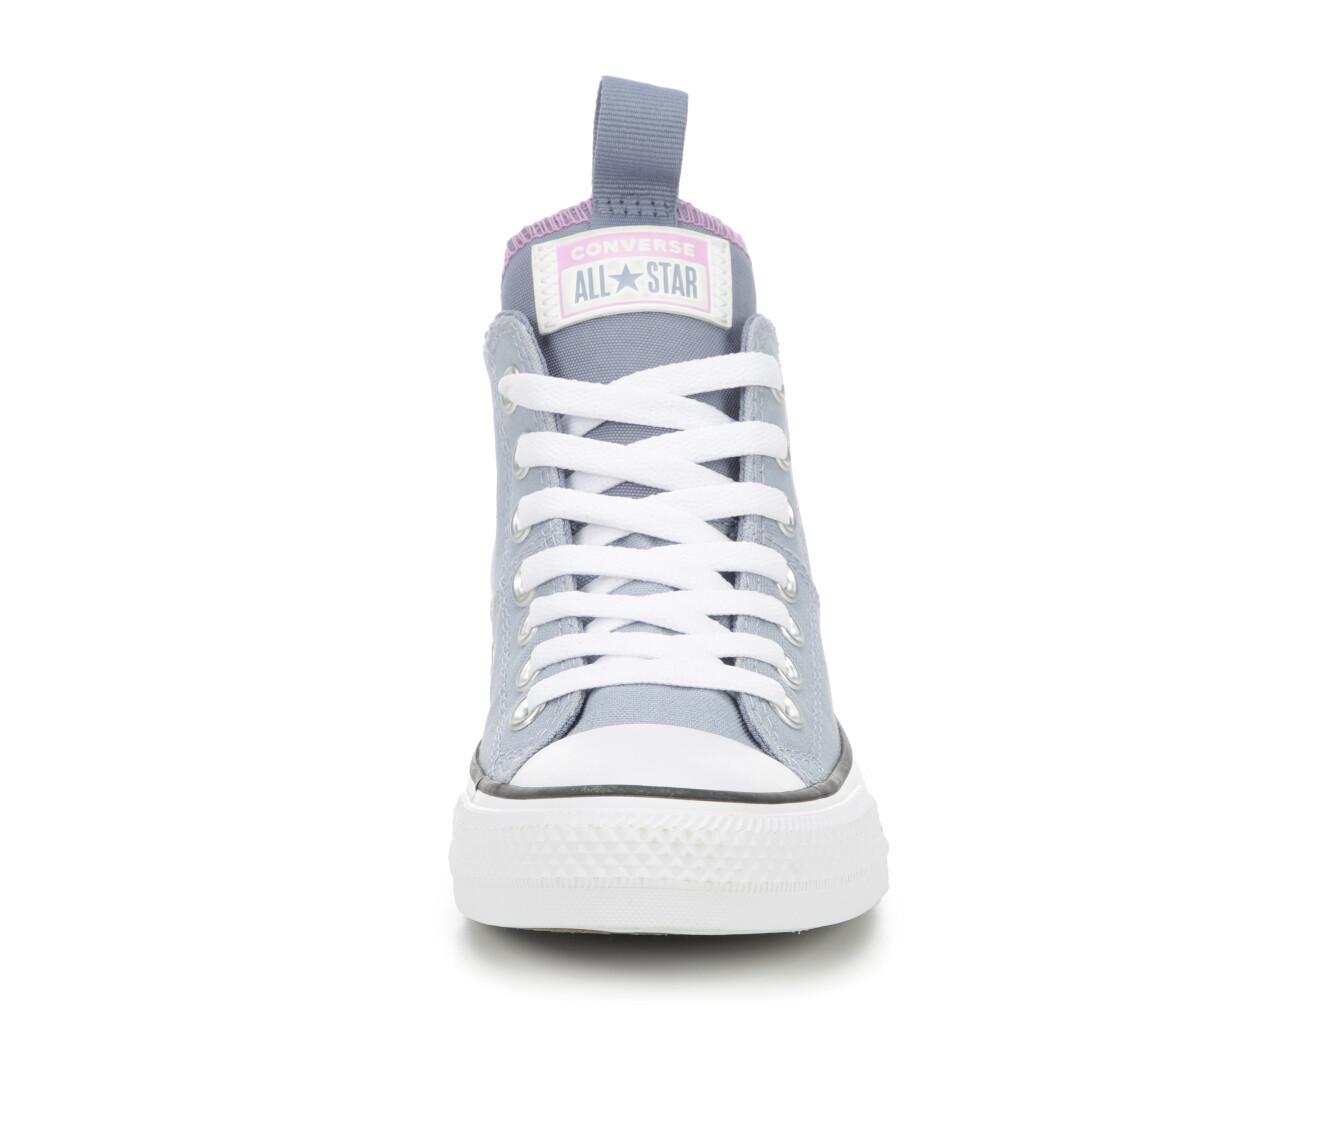 Women's Converse Chuck Taylor All Star Madison Mid Stitch Sneakers